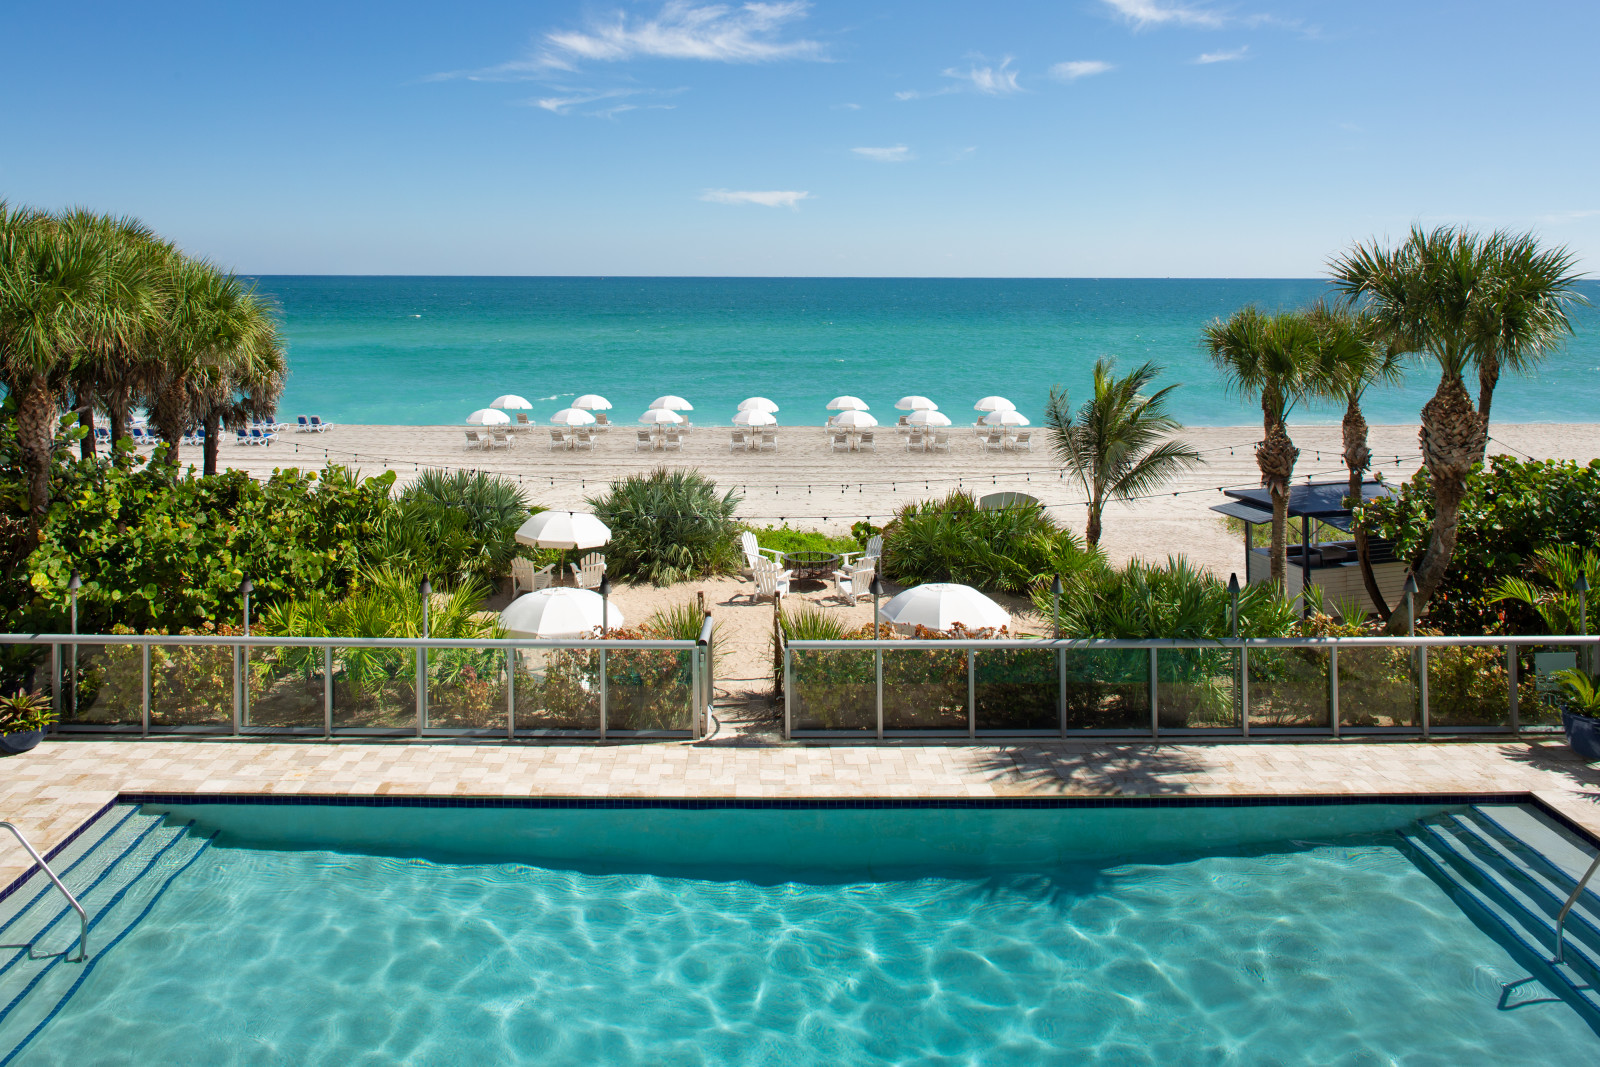 Preferred Club very private serenity pool overlooks the ocean as